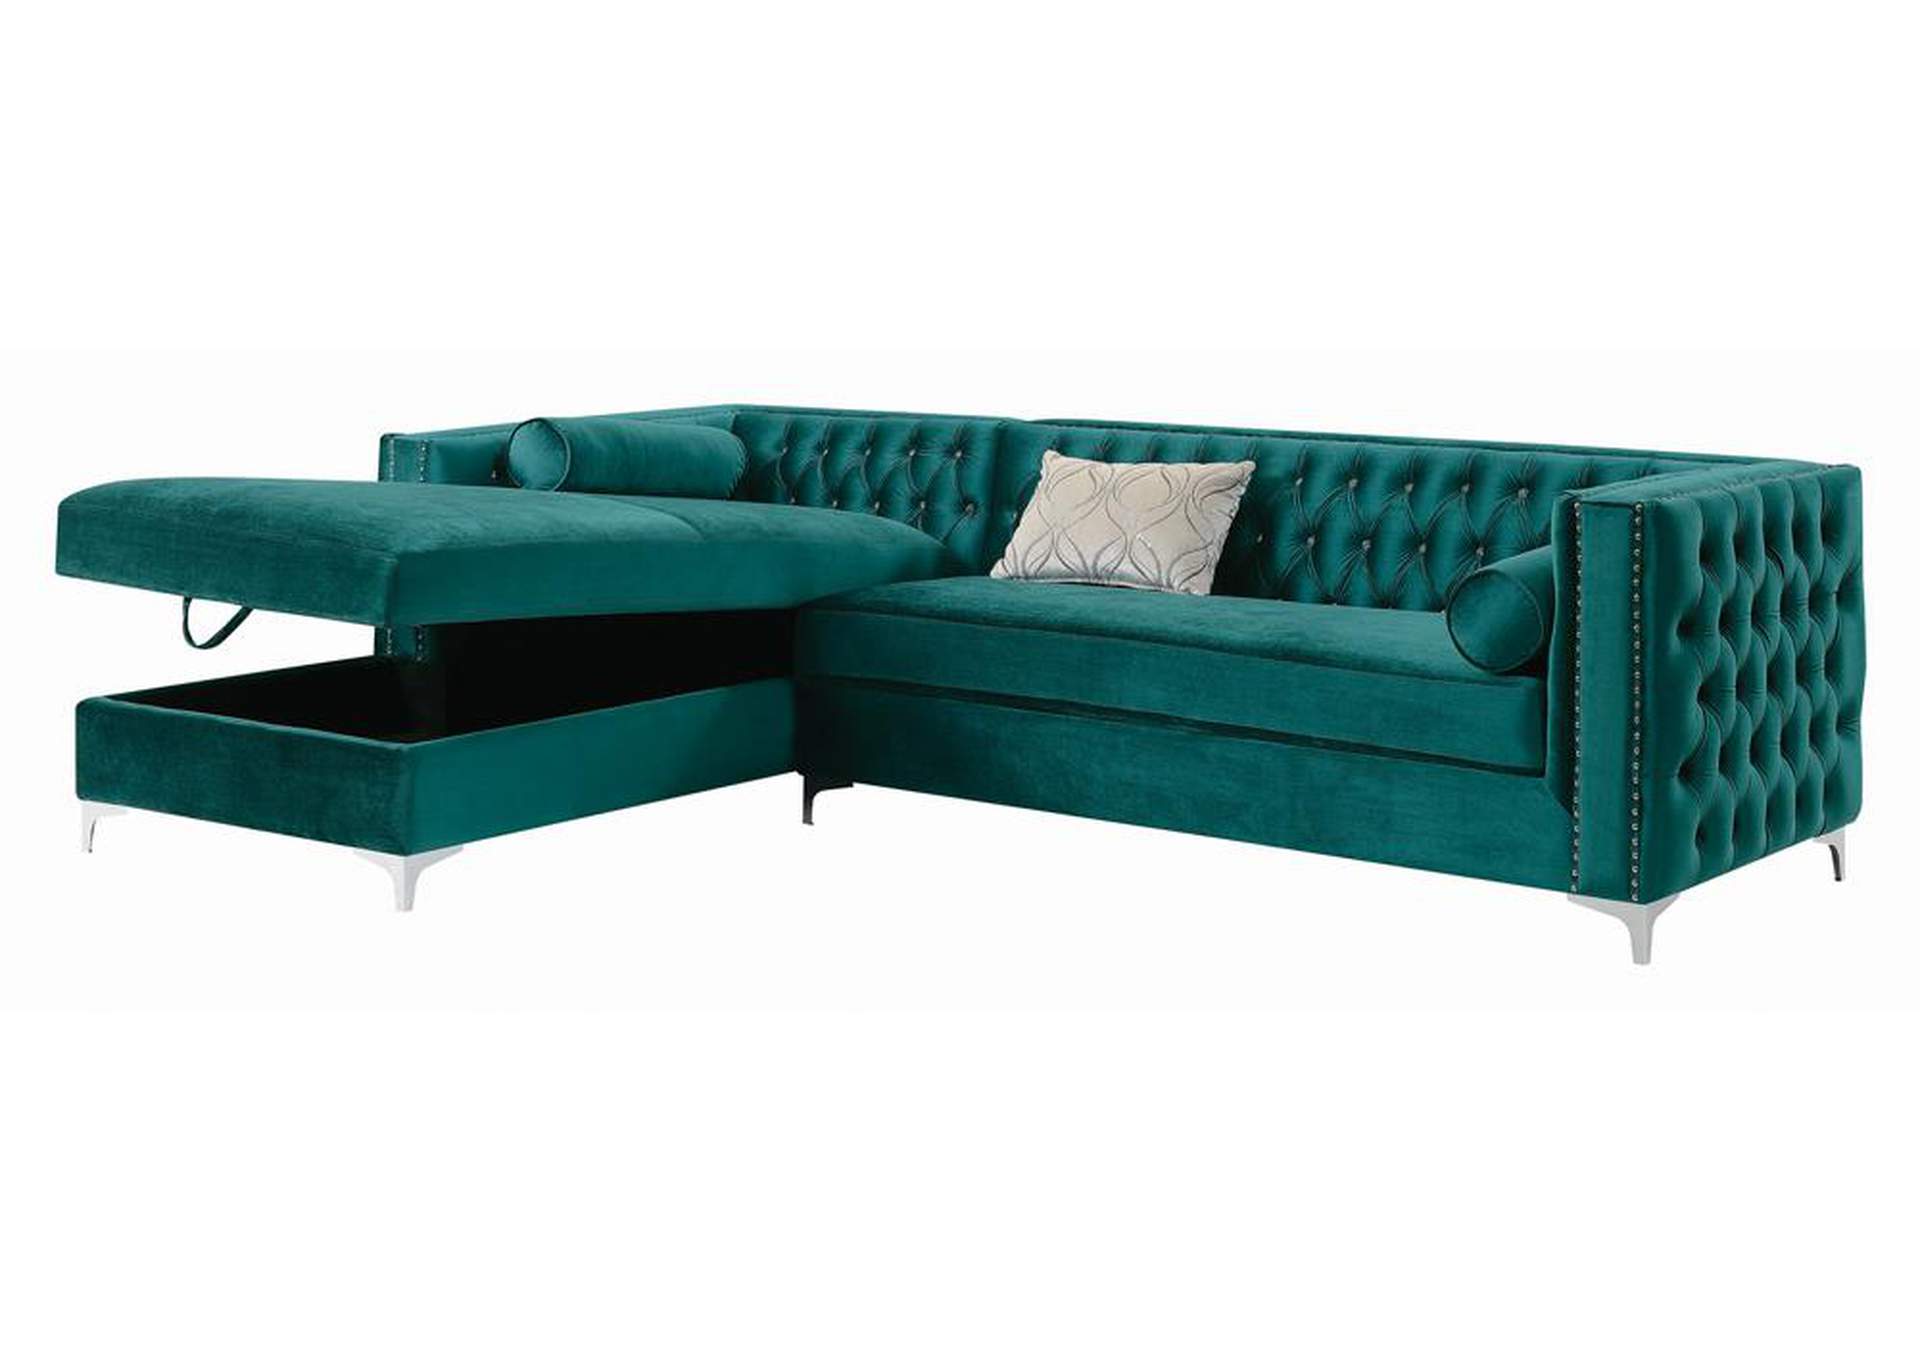 Bellaire Contemporary Teal And Chrome Sectional,Coaster Furniture